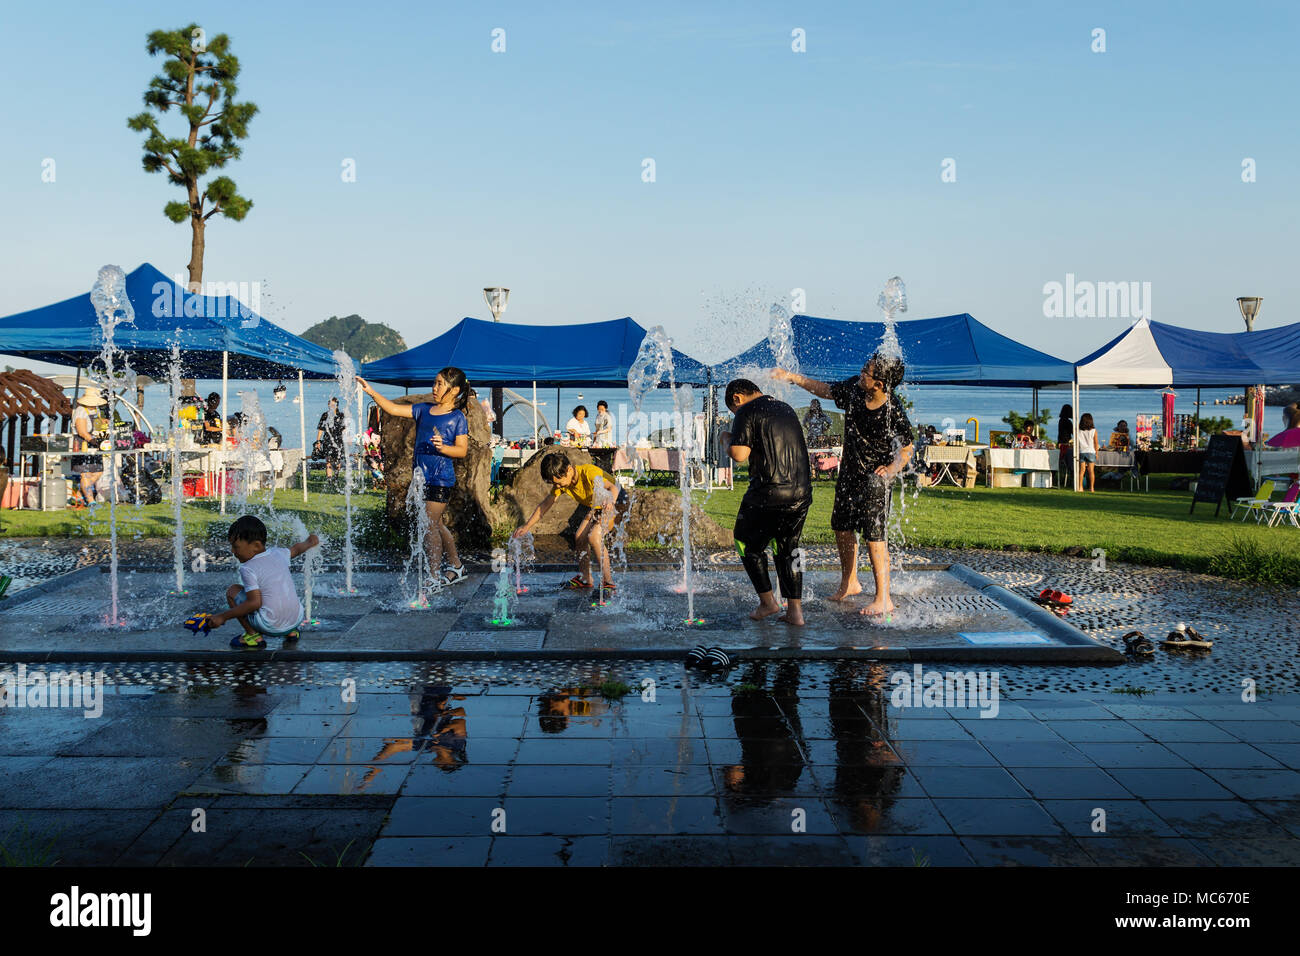 Seogwipo, Jeju Island, Korea - August 27 2017: Kids playing at a fountain at the coast in front of souvenir stands Stock Photo